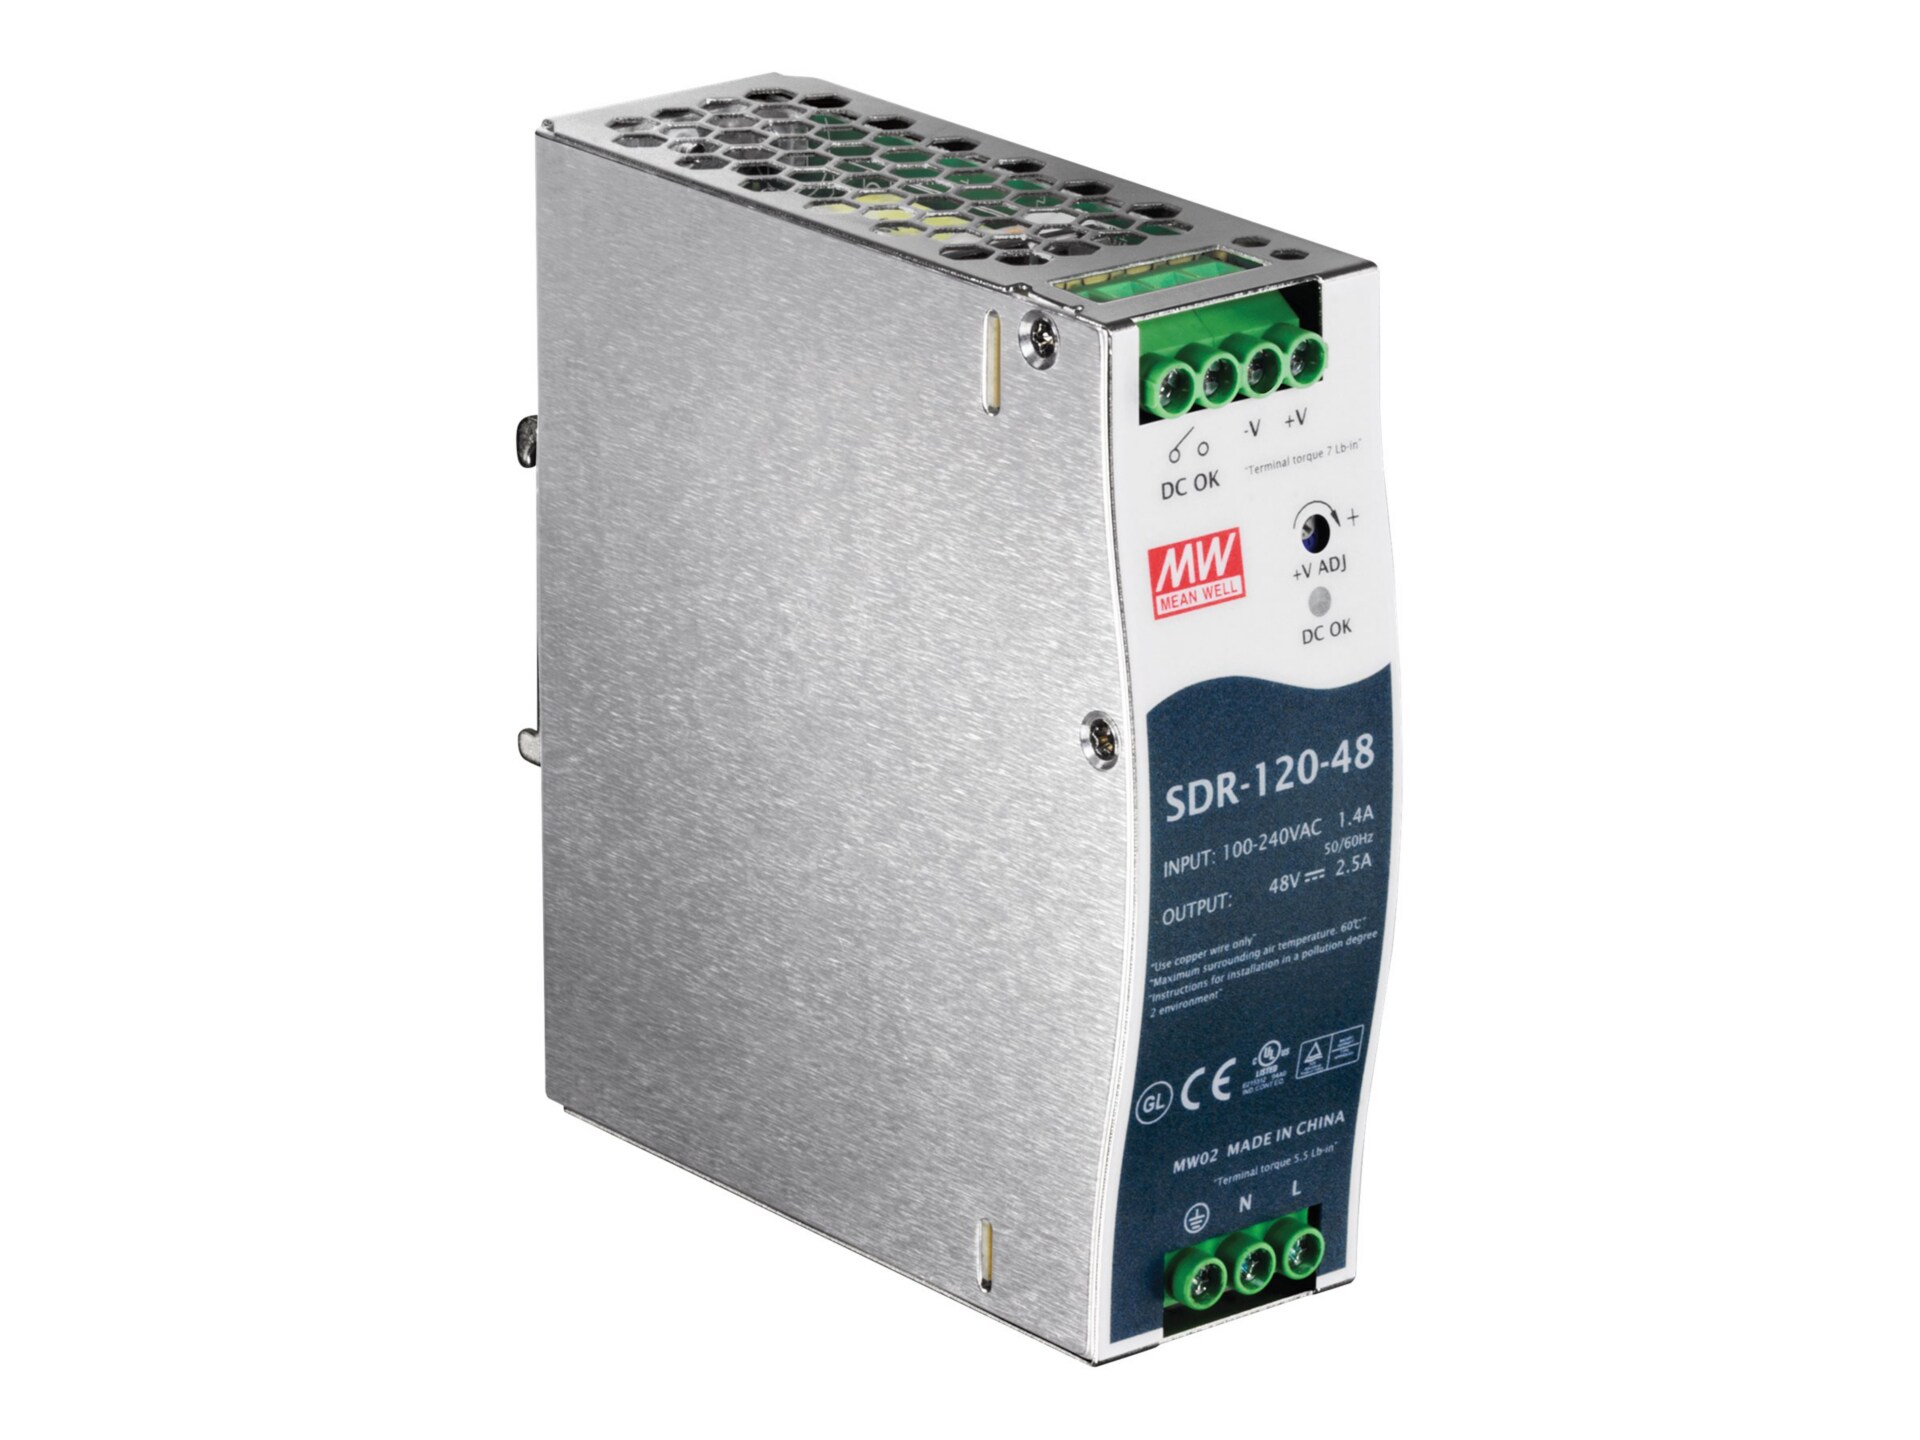 TRENDnet 120 W Single Output Industrial DIN-Rail Power Supply, Extreme -25 to 70 °C (-13 to 158 °F) Operating Temp,